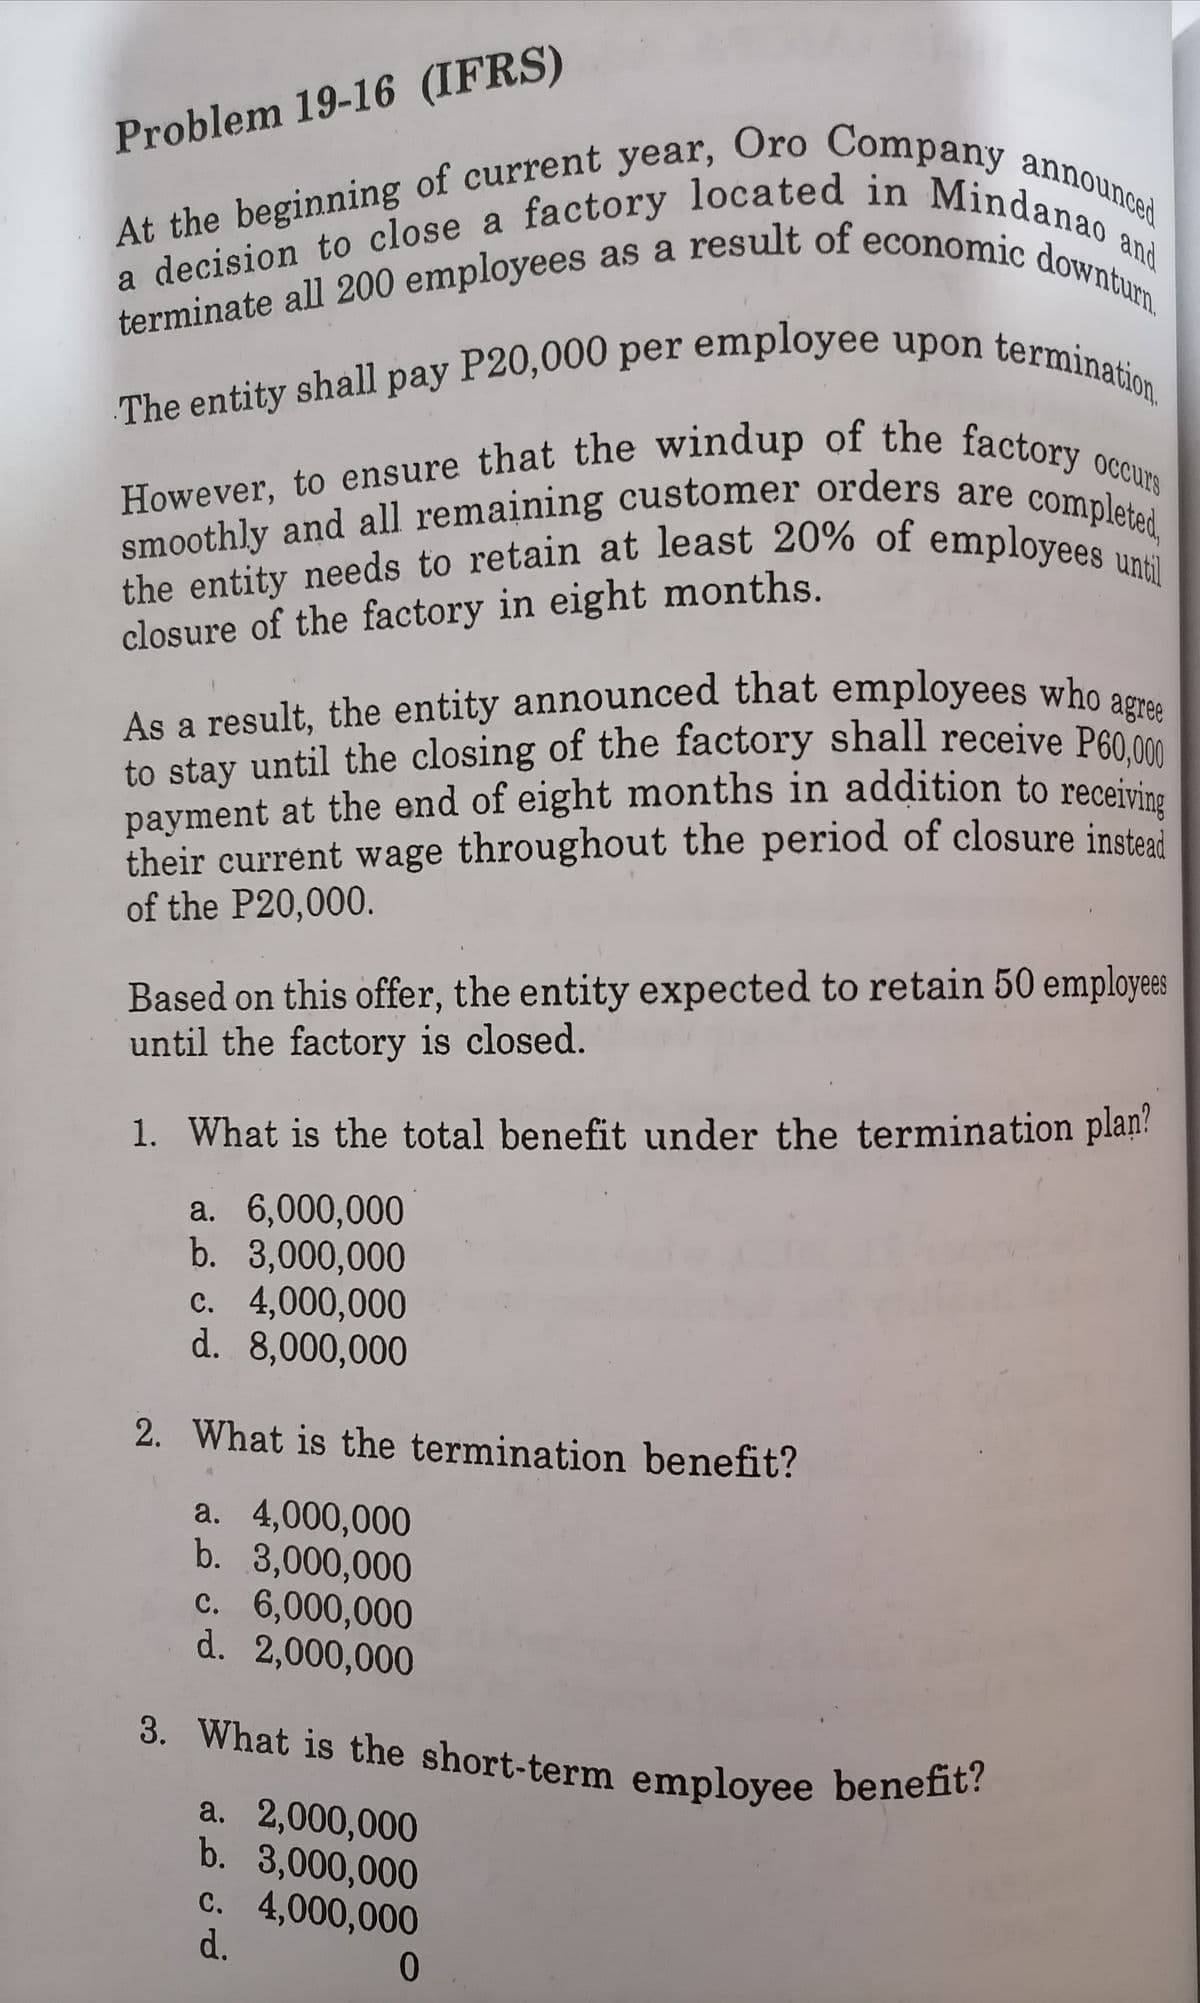 The entity shall pay P20,000 per employee upon termination.
payment at the end of eight months in addition to receiving
terminate all 200 employees as a result of economic downturn.
the entity needs to retain at least 20% of employees until
to stay until the closing of the factory shall receive P60,000
smoothly and all remaining customer orders are completed,
However, to ensure that the windup of the factory occurs
As a result, the entity announced that employees who agree
3. What is the short-term employee benefit?
Problem 19-16 (IFRS)
and
closure of the factory in eight months.
As a result, the entity announced that employees who o
to stay until the closing of the factory shall receive P6000
payment at the end of eight months in addition to receiri
their current wage throughout the period of closure insteai
of the P20,000.
Based on this offer, the entity expected to retain 50 employees
until the factory is closed.
1. What is the total benefit under the termination plan?
a. 6,000,000
b. 3,000,000
c. 4,000,000
d. 8,000,000
2. What is the termination benefit?
a. 4,000,000
b. 3,000,000
c. 6,000,000
d. 2,000,000
3. What is the short-term emplovee benefit?
a. 2,000,000
b. 3,000,000
c. 4,000,000
d.
